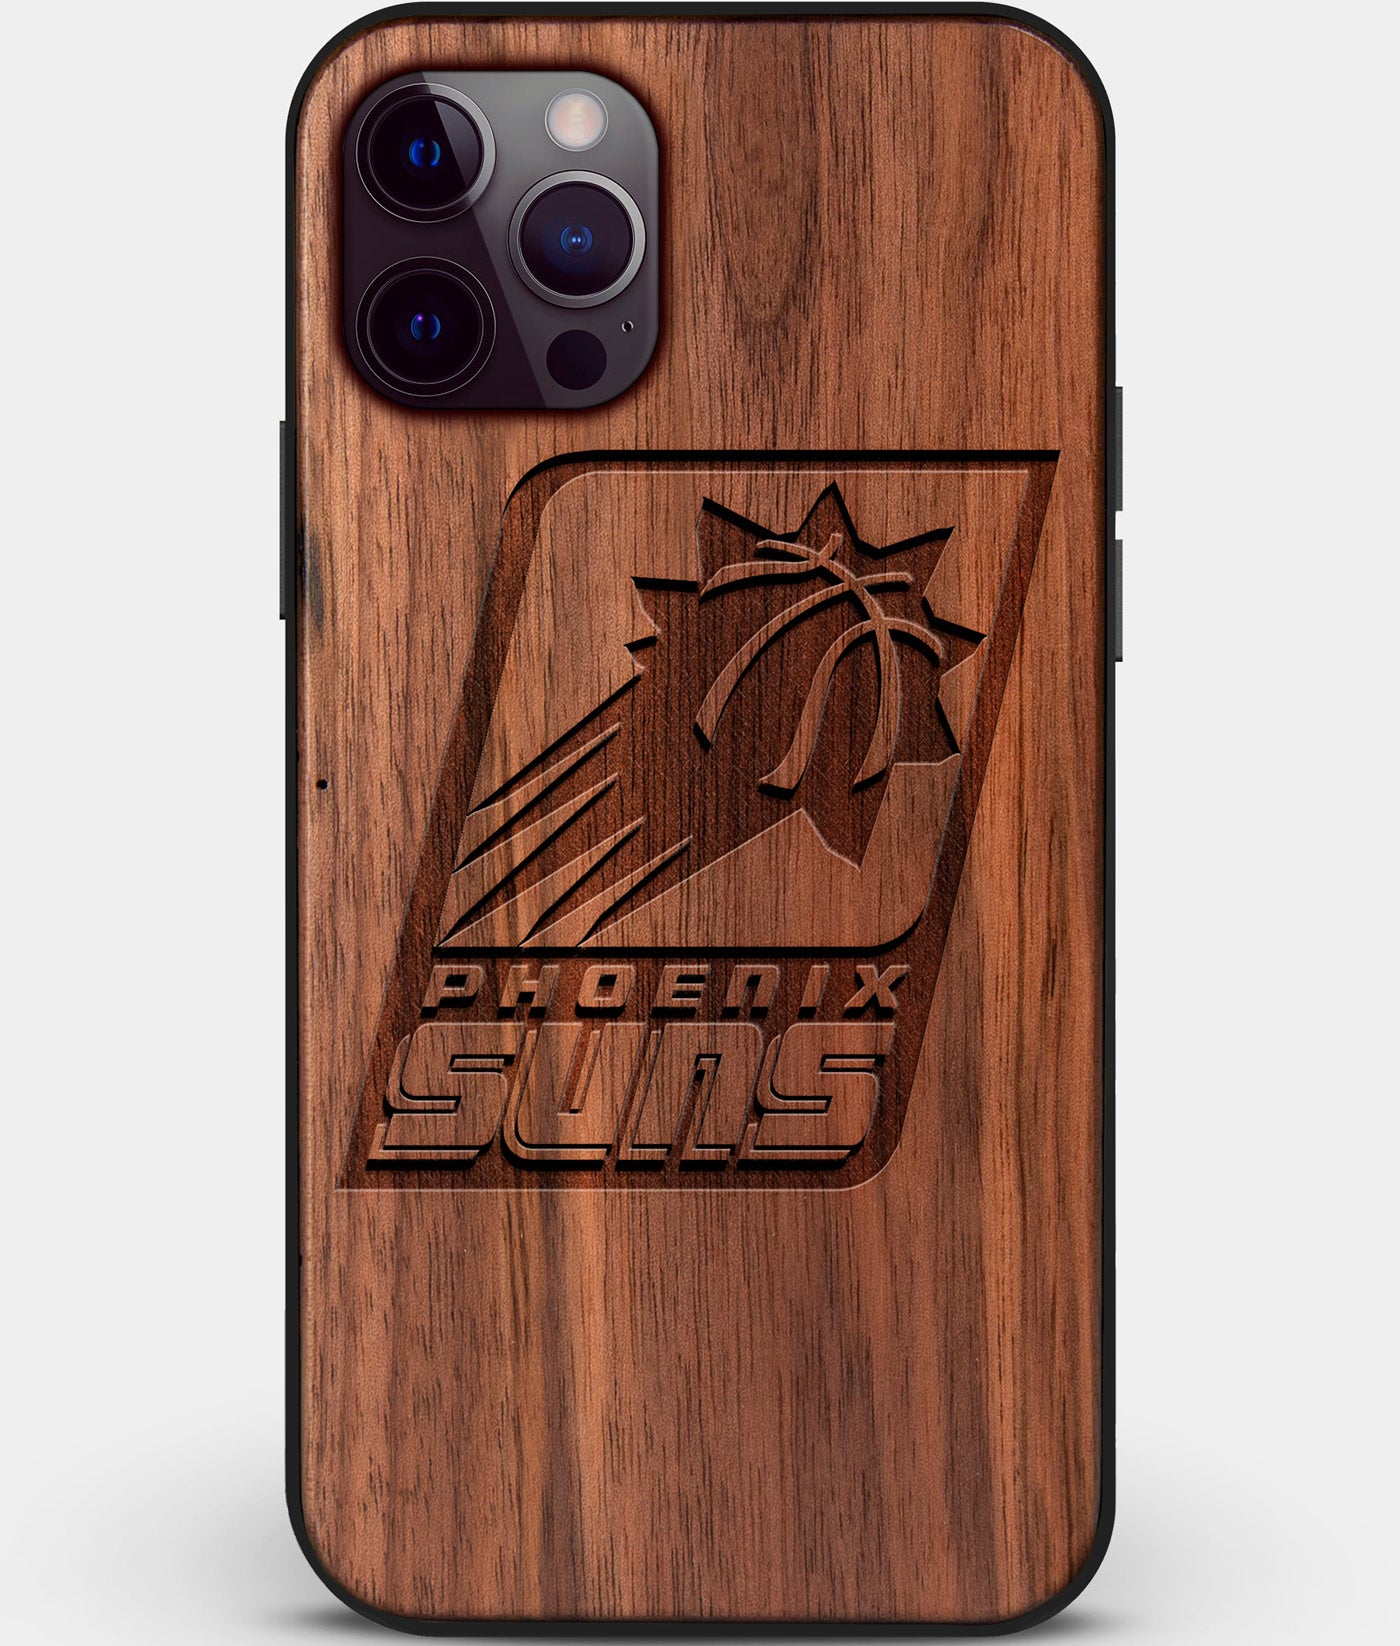 Custom Carved Wood Phoenix Suns iPhone 12 Pro Case | Personalized Walnut Wood Phoenix Suns Cover, Birthday Gift, Gifts For Him, Monogrammed Gift For Fan | by Engraved In Nature